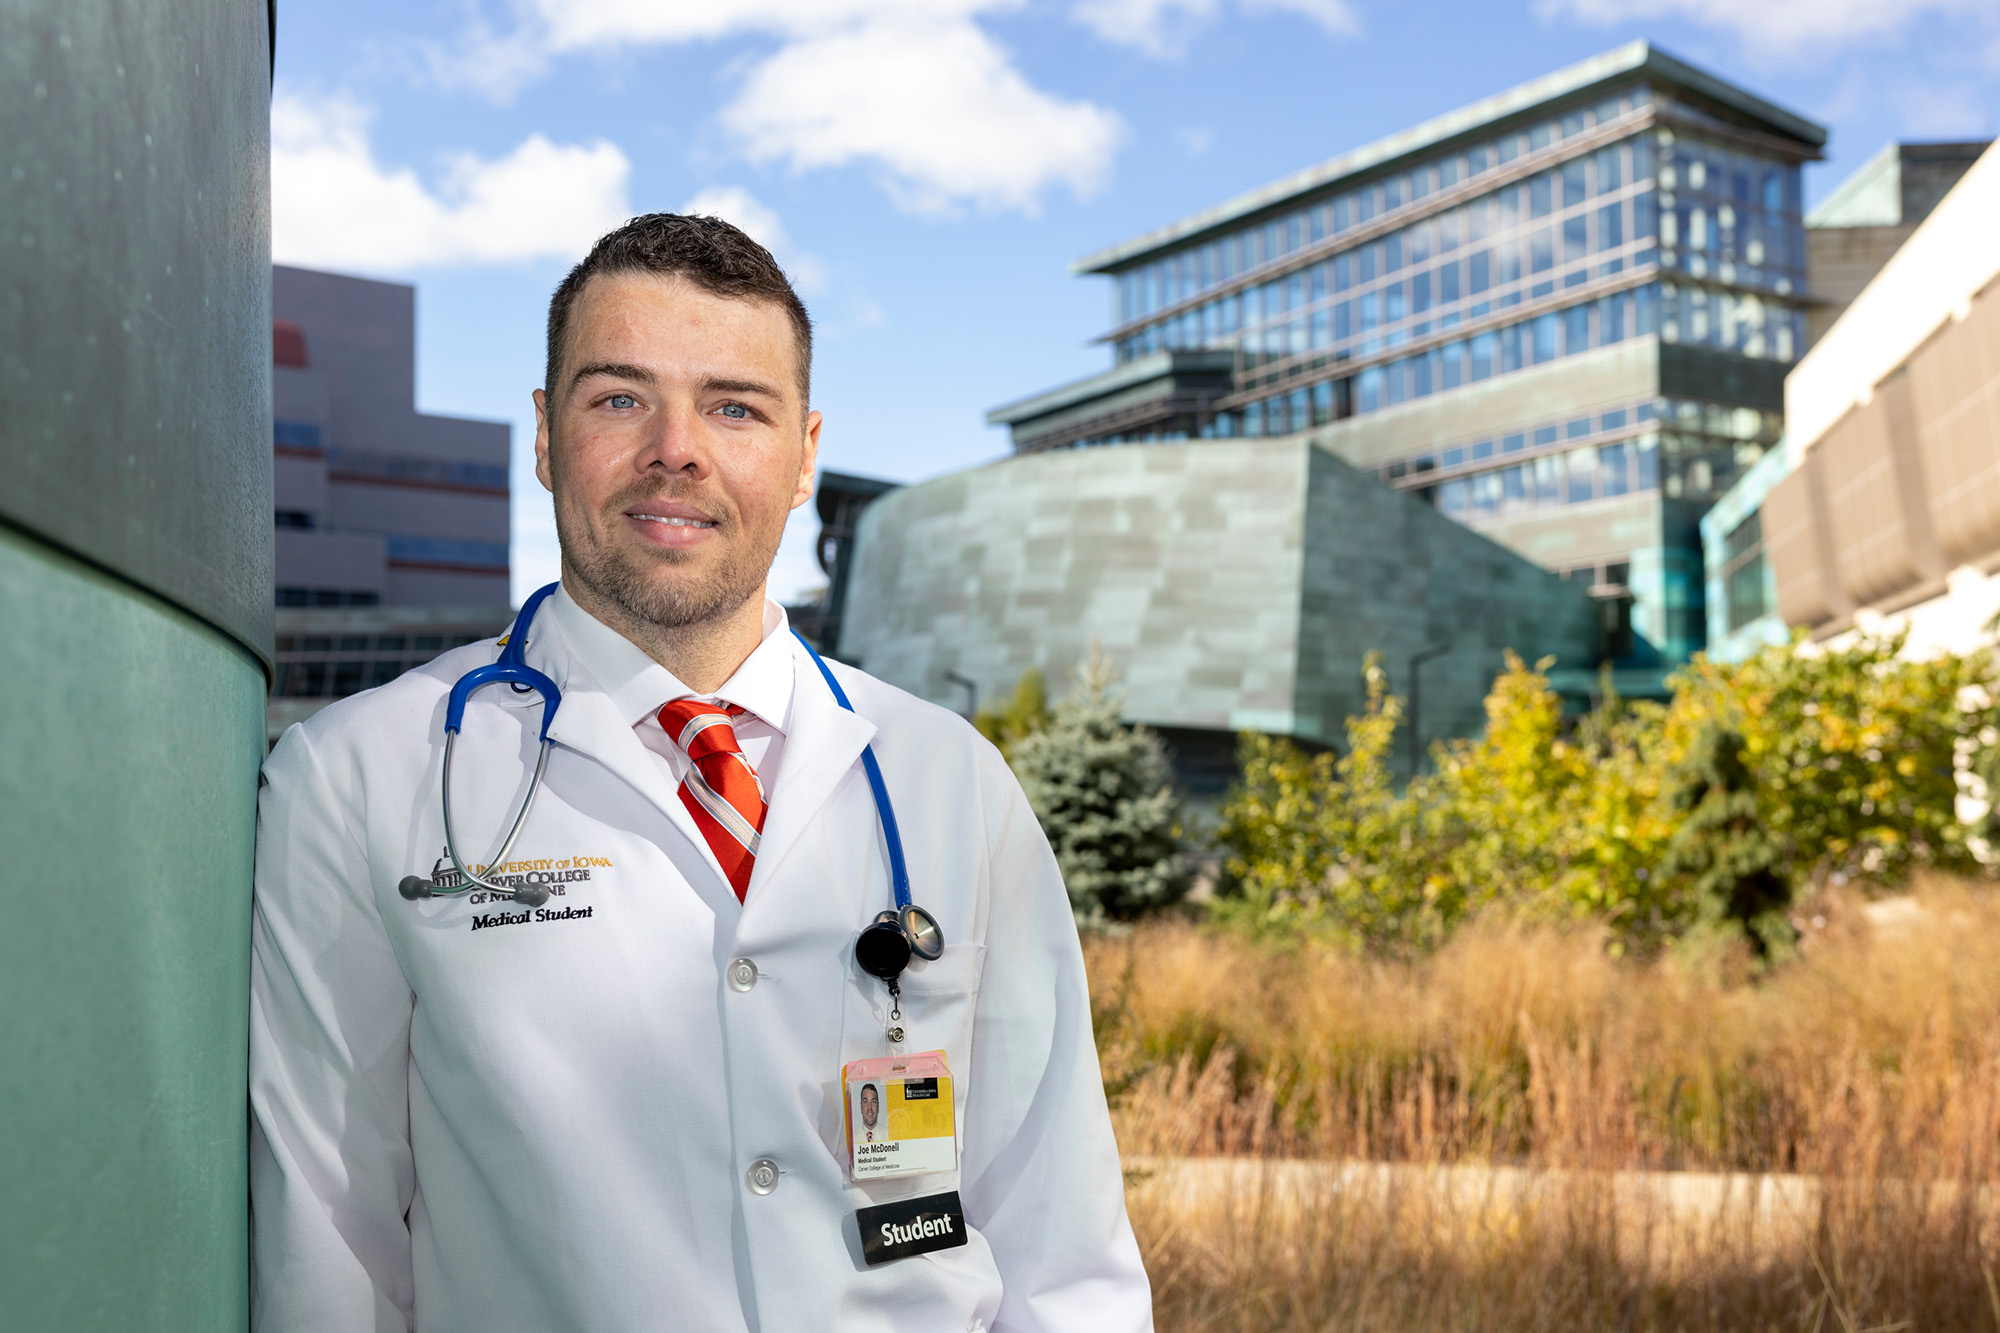 University of Iowa Carver College of Medicine student Joseph McDonell stands outside on the health care campus